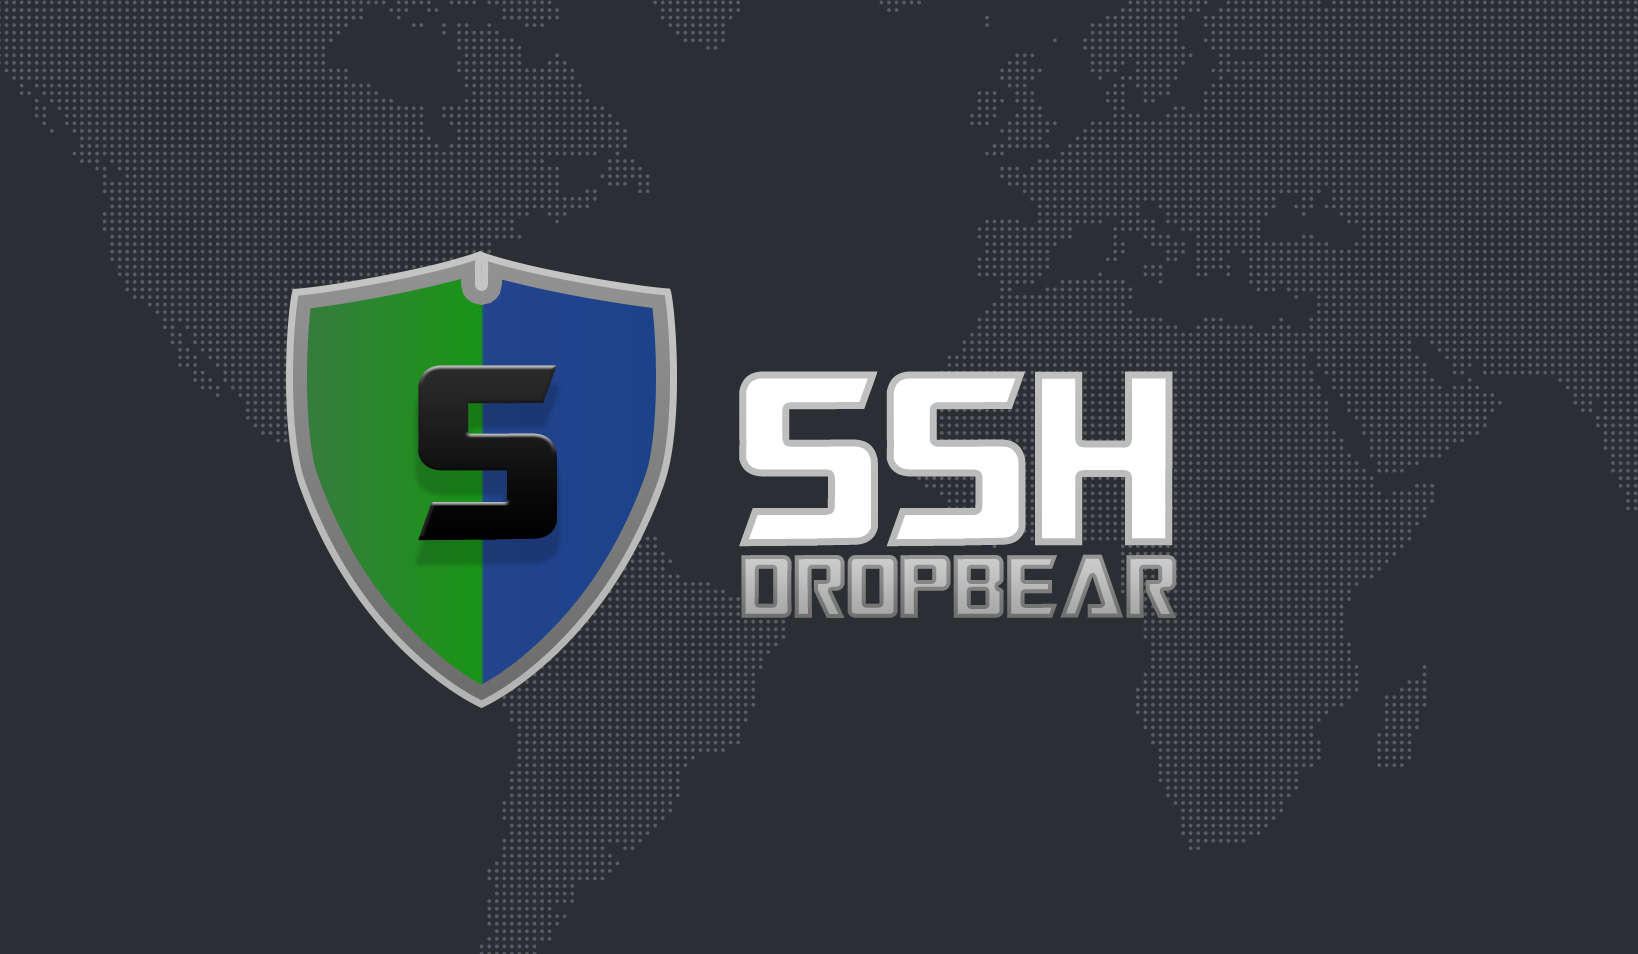 how to fix dropbear ssh server 2012.55 is vulnerable